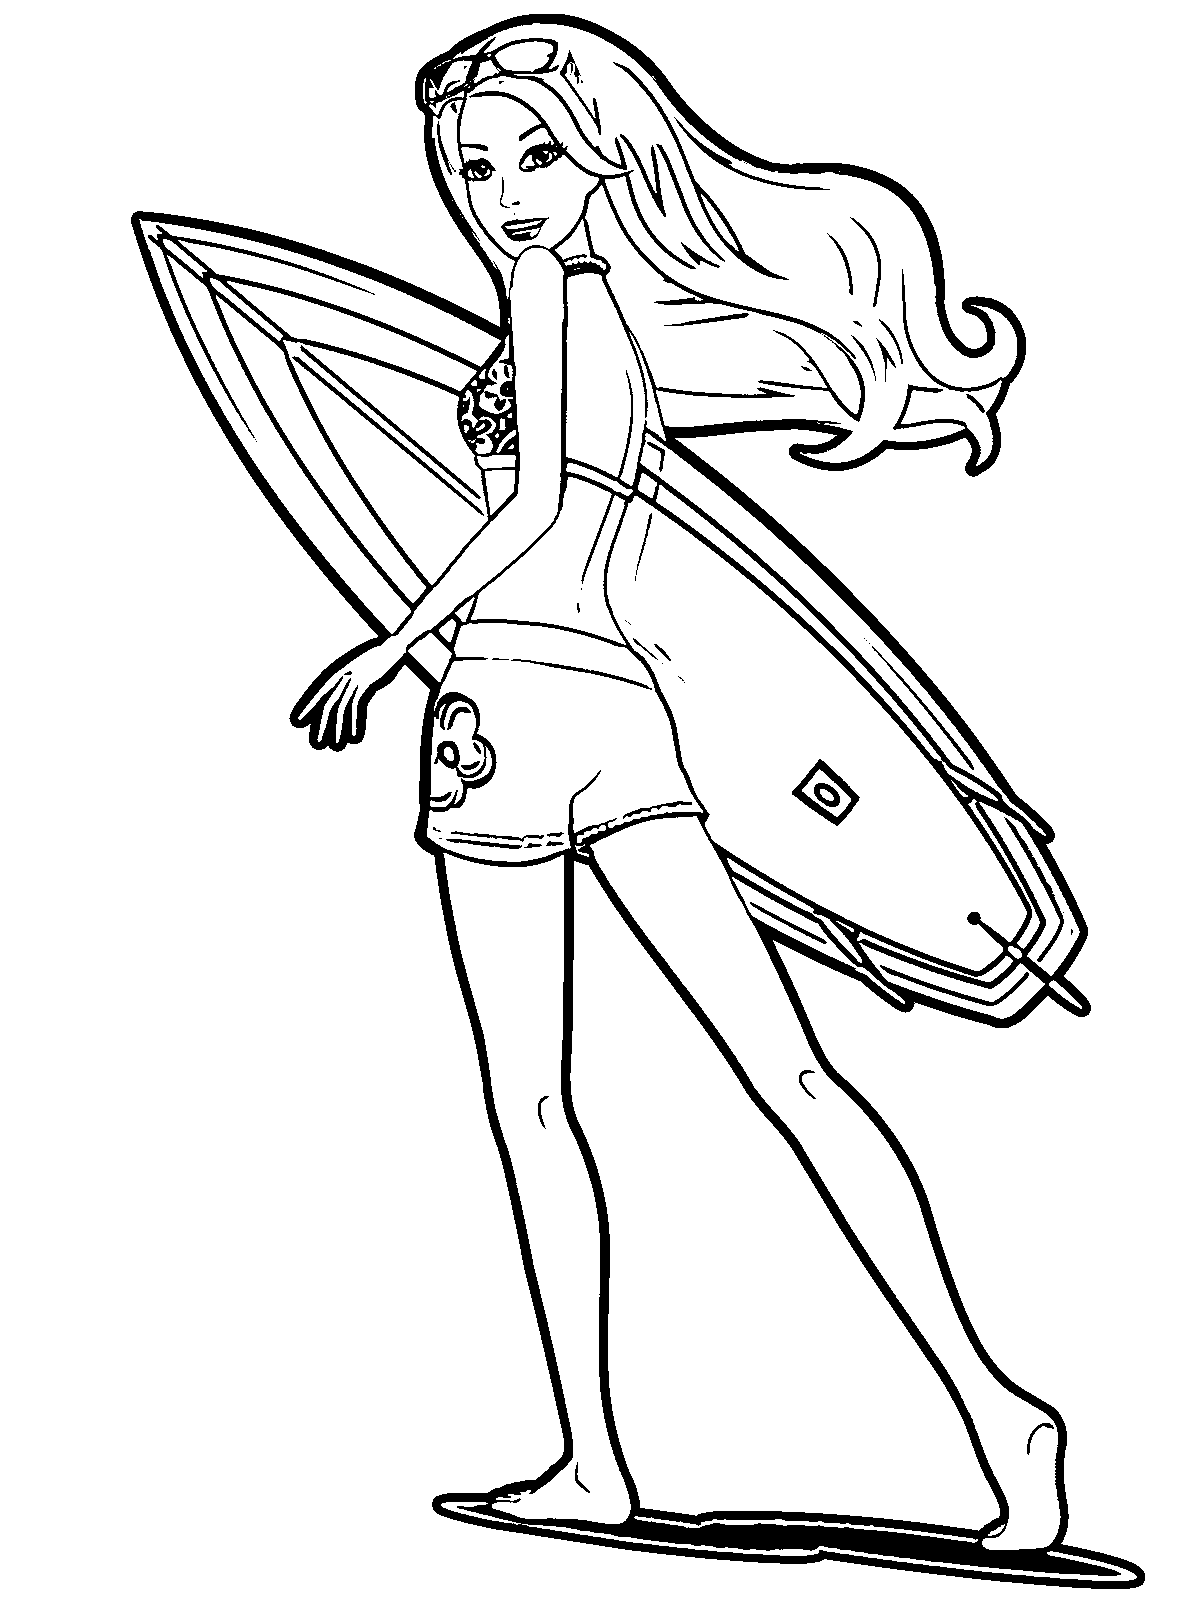 Barbie With Surfboard Coloring Page